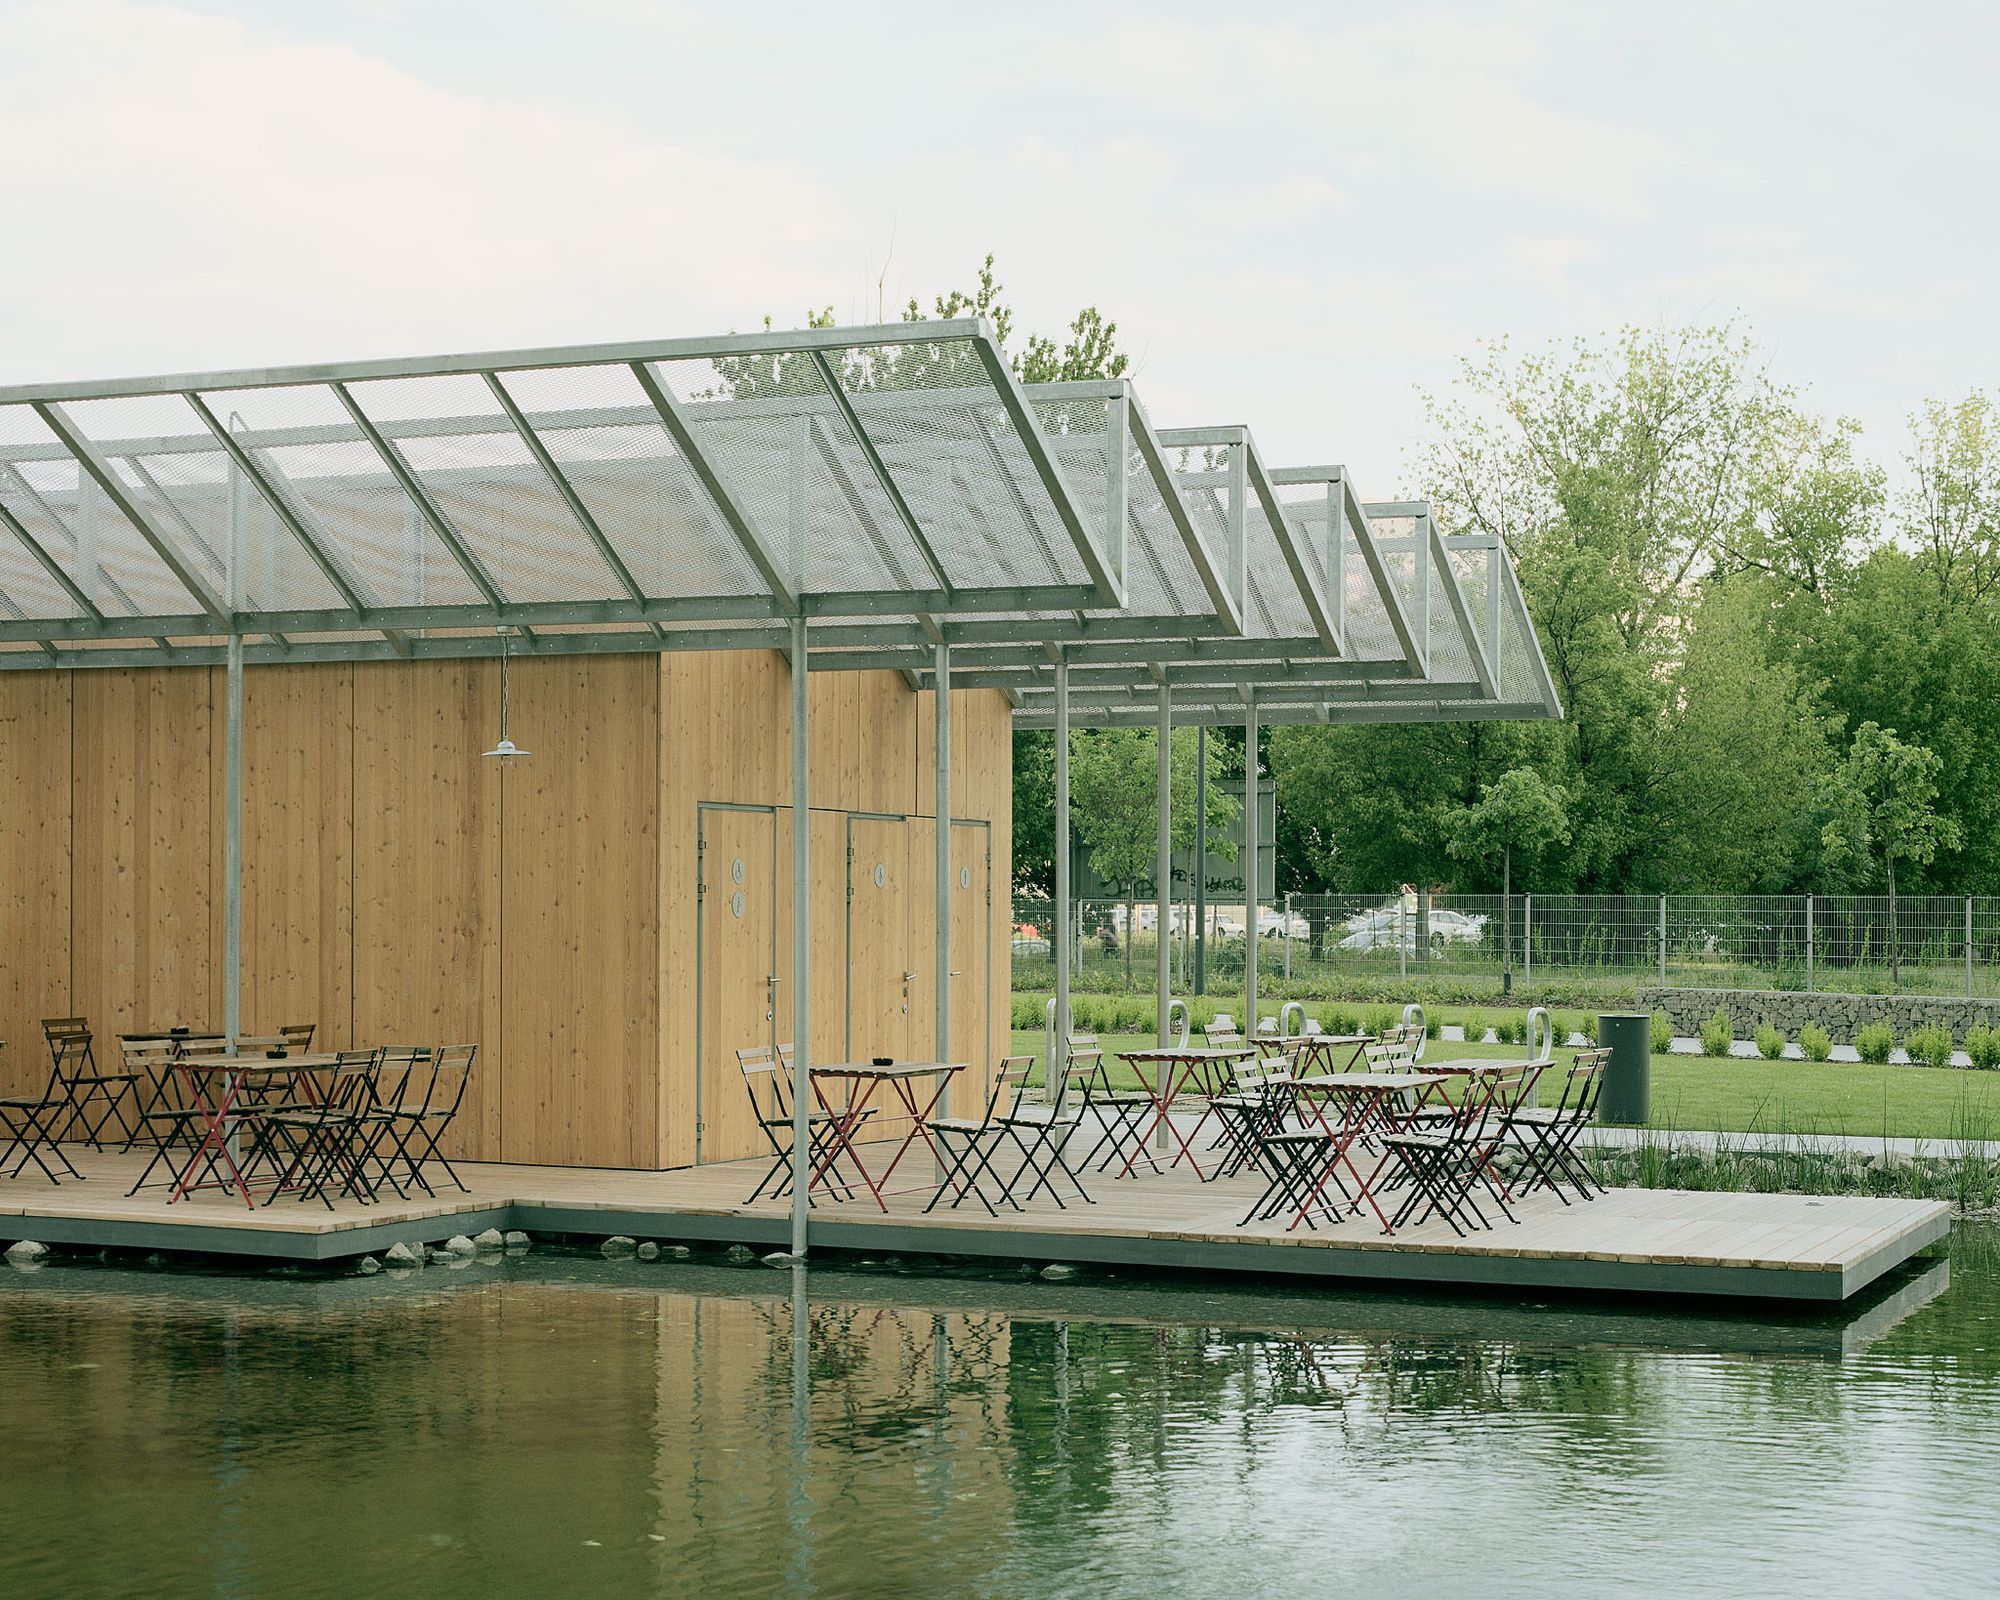 Green and sustainable | Vizafogó Ecopark wins Budapest Architecture Award